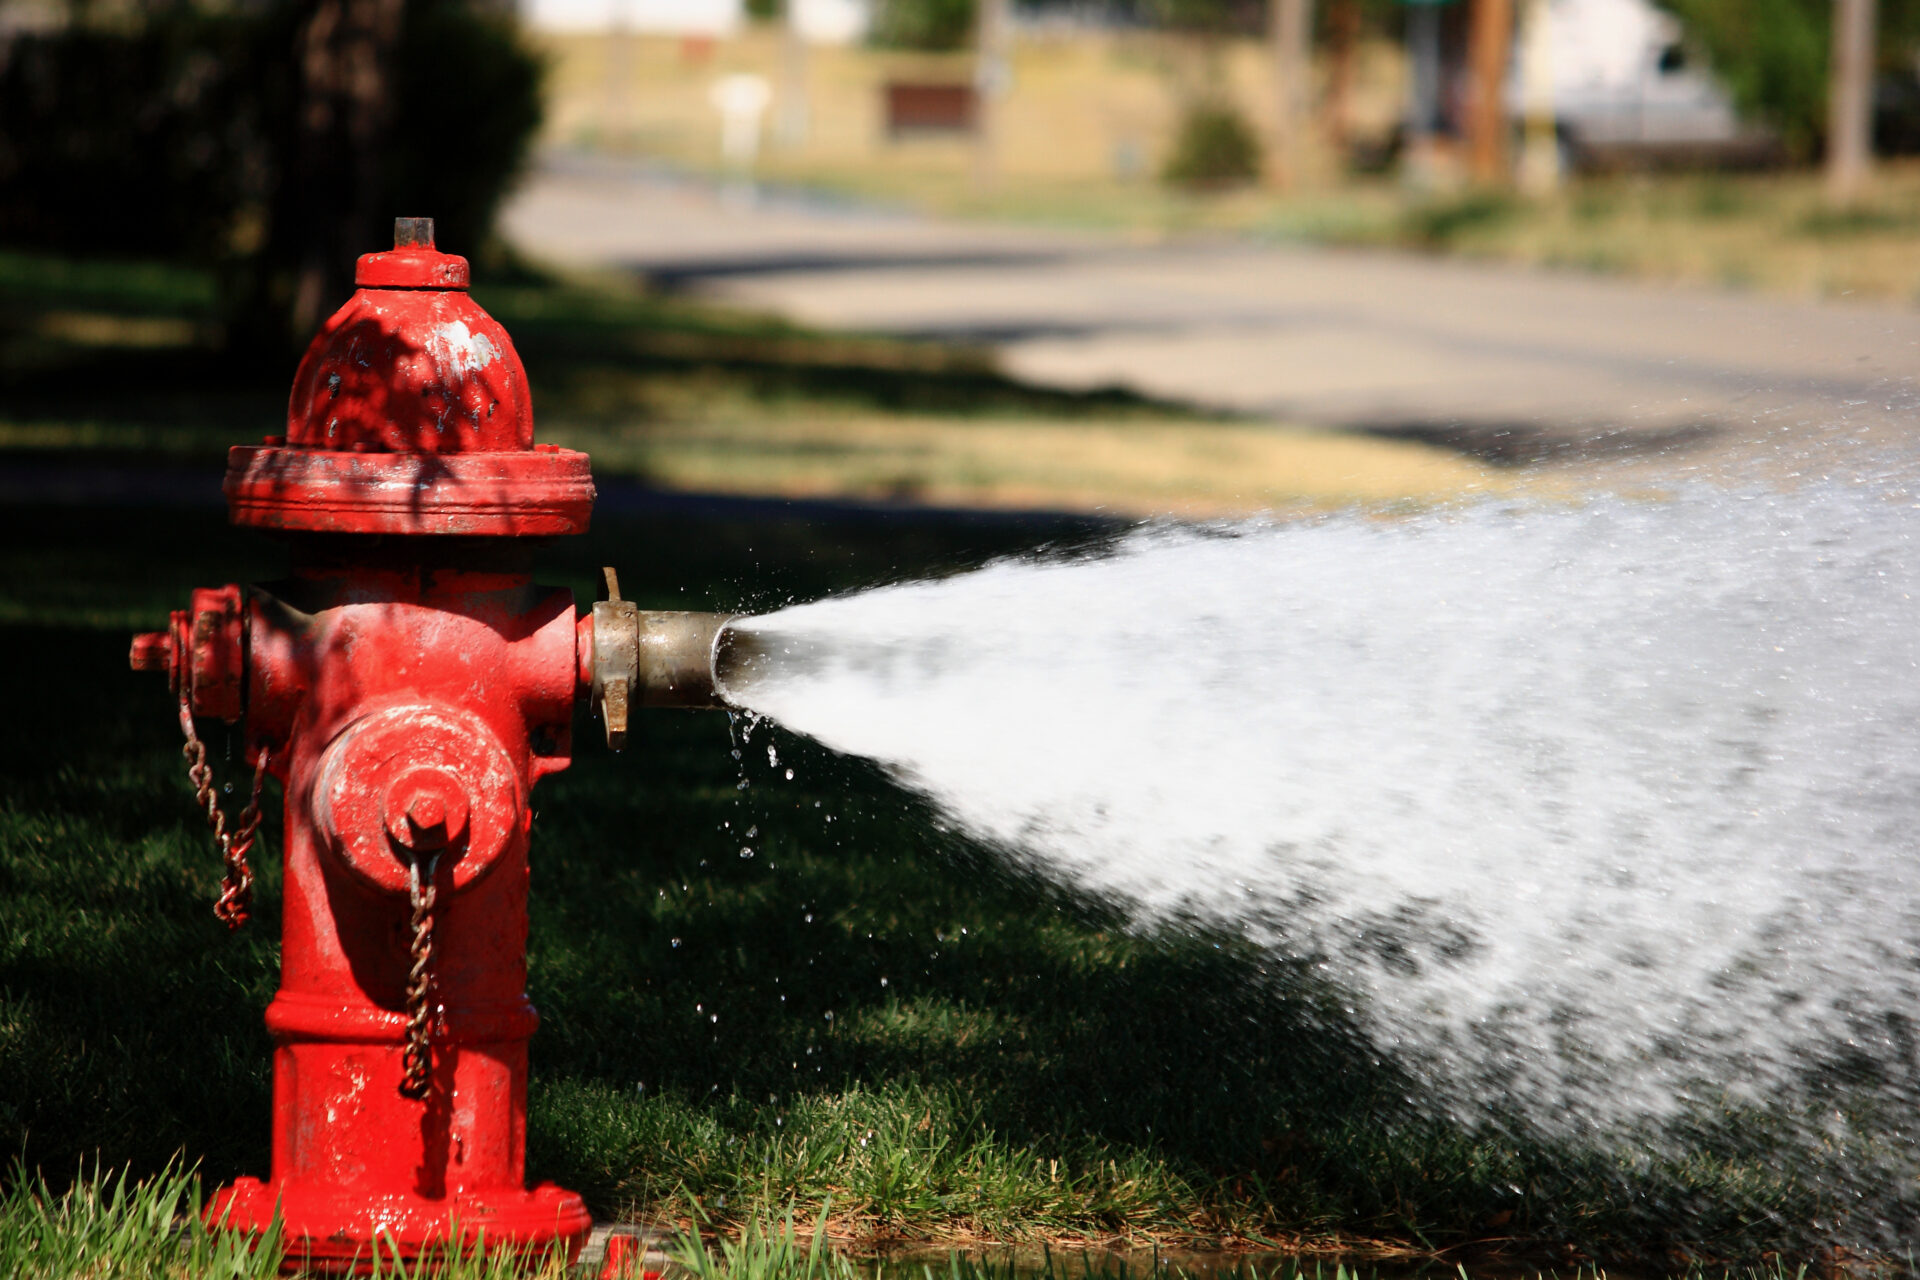 $70 Million Needed To Fix Fire Hydrants Over 10 Years